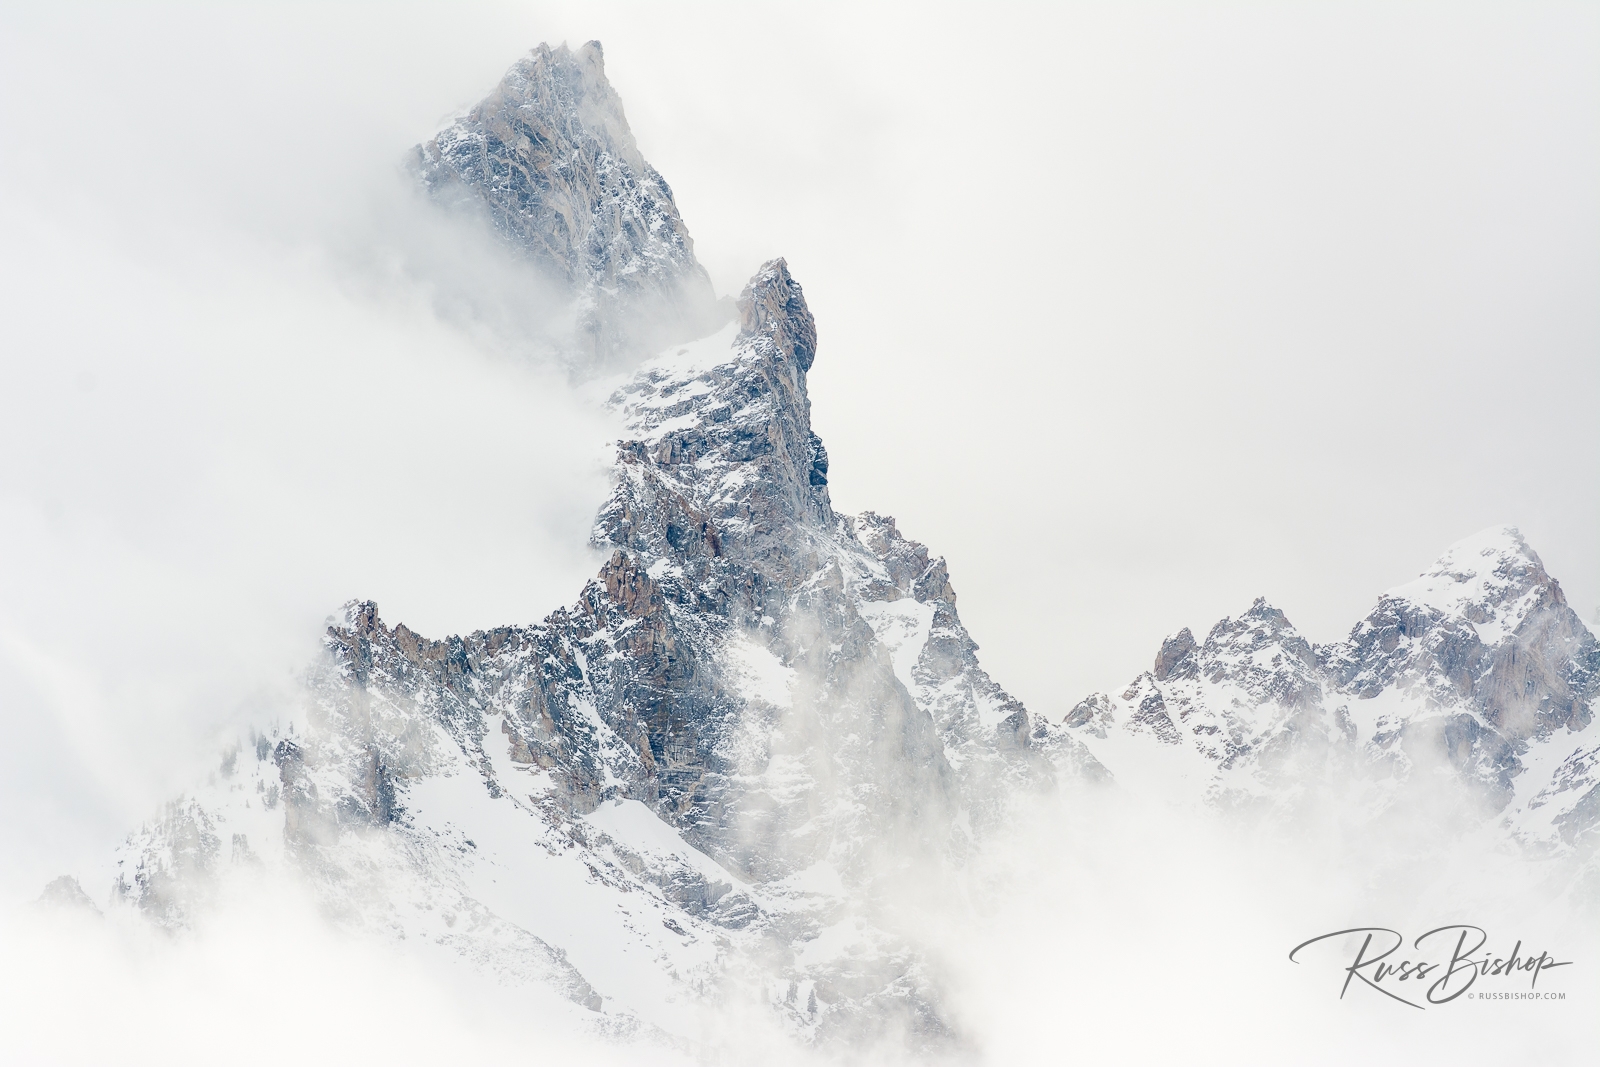 The Power of Negative Space. Clearing winter storm over Teewinot Mountain, Grand Teton National Park, Wyoming